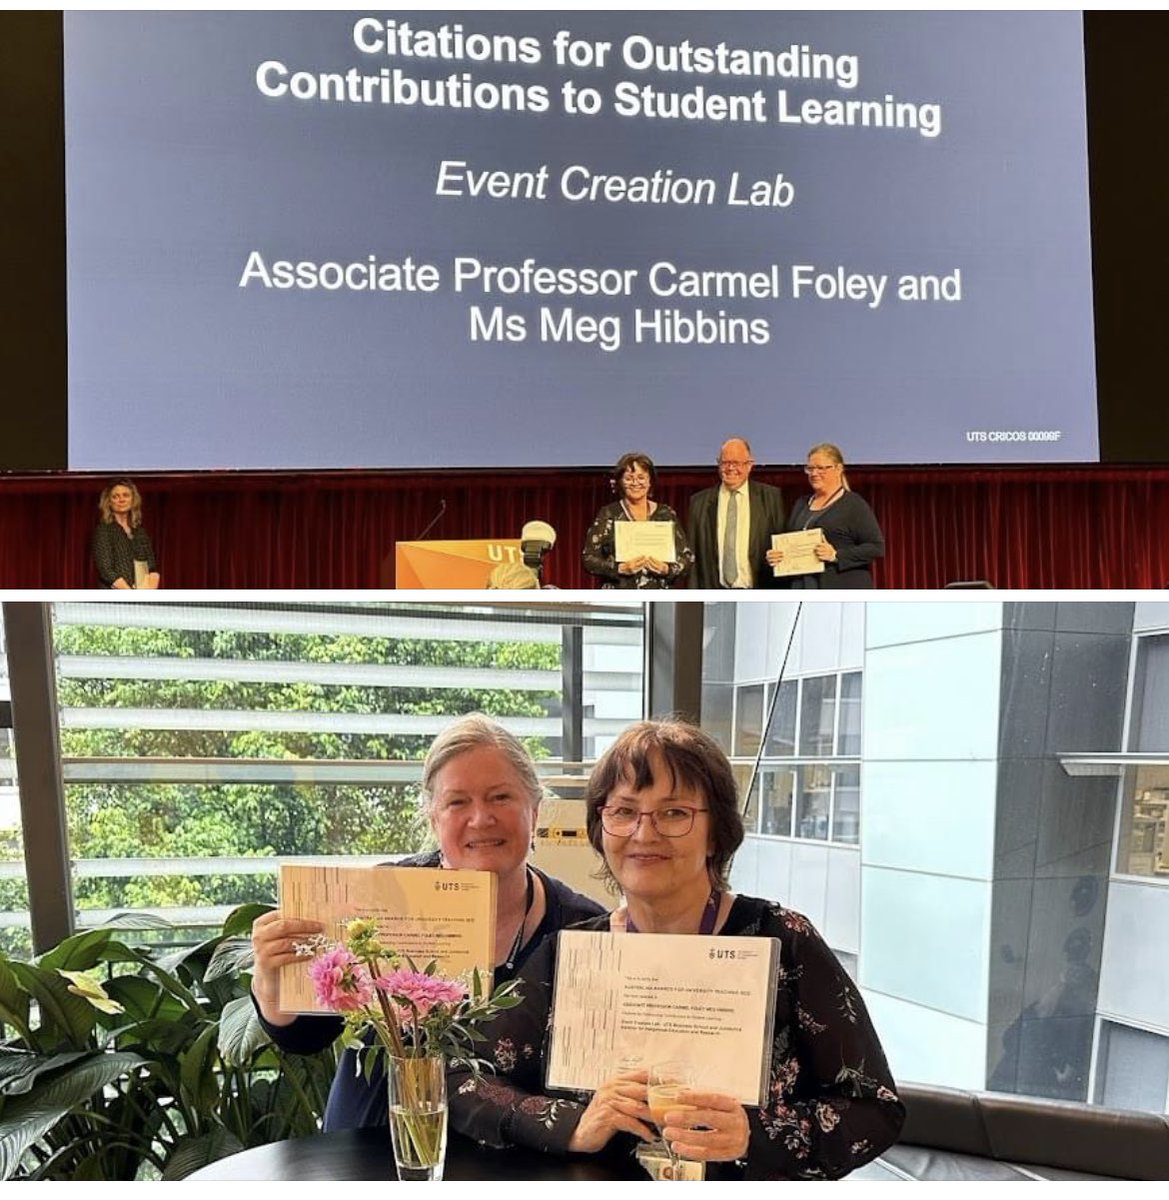 Congratulations @EventologyOz and @carmelUTS as the recipients of Citations for Outstanding Contributions to Student Learning! 
#studentsuccess #teachingandlearning #eventmanagement #eventindustry